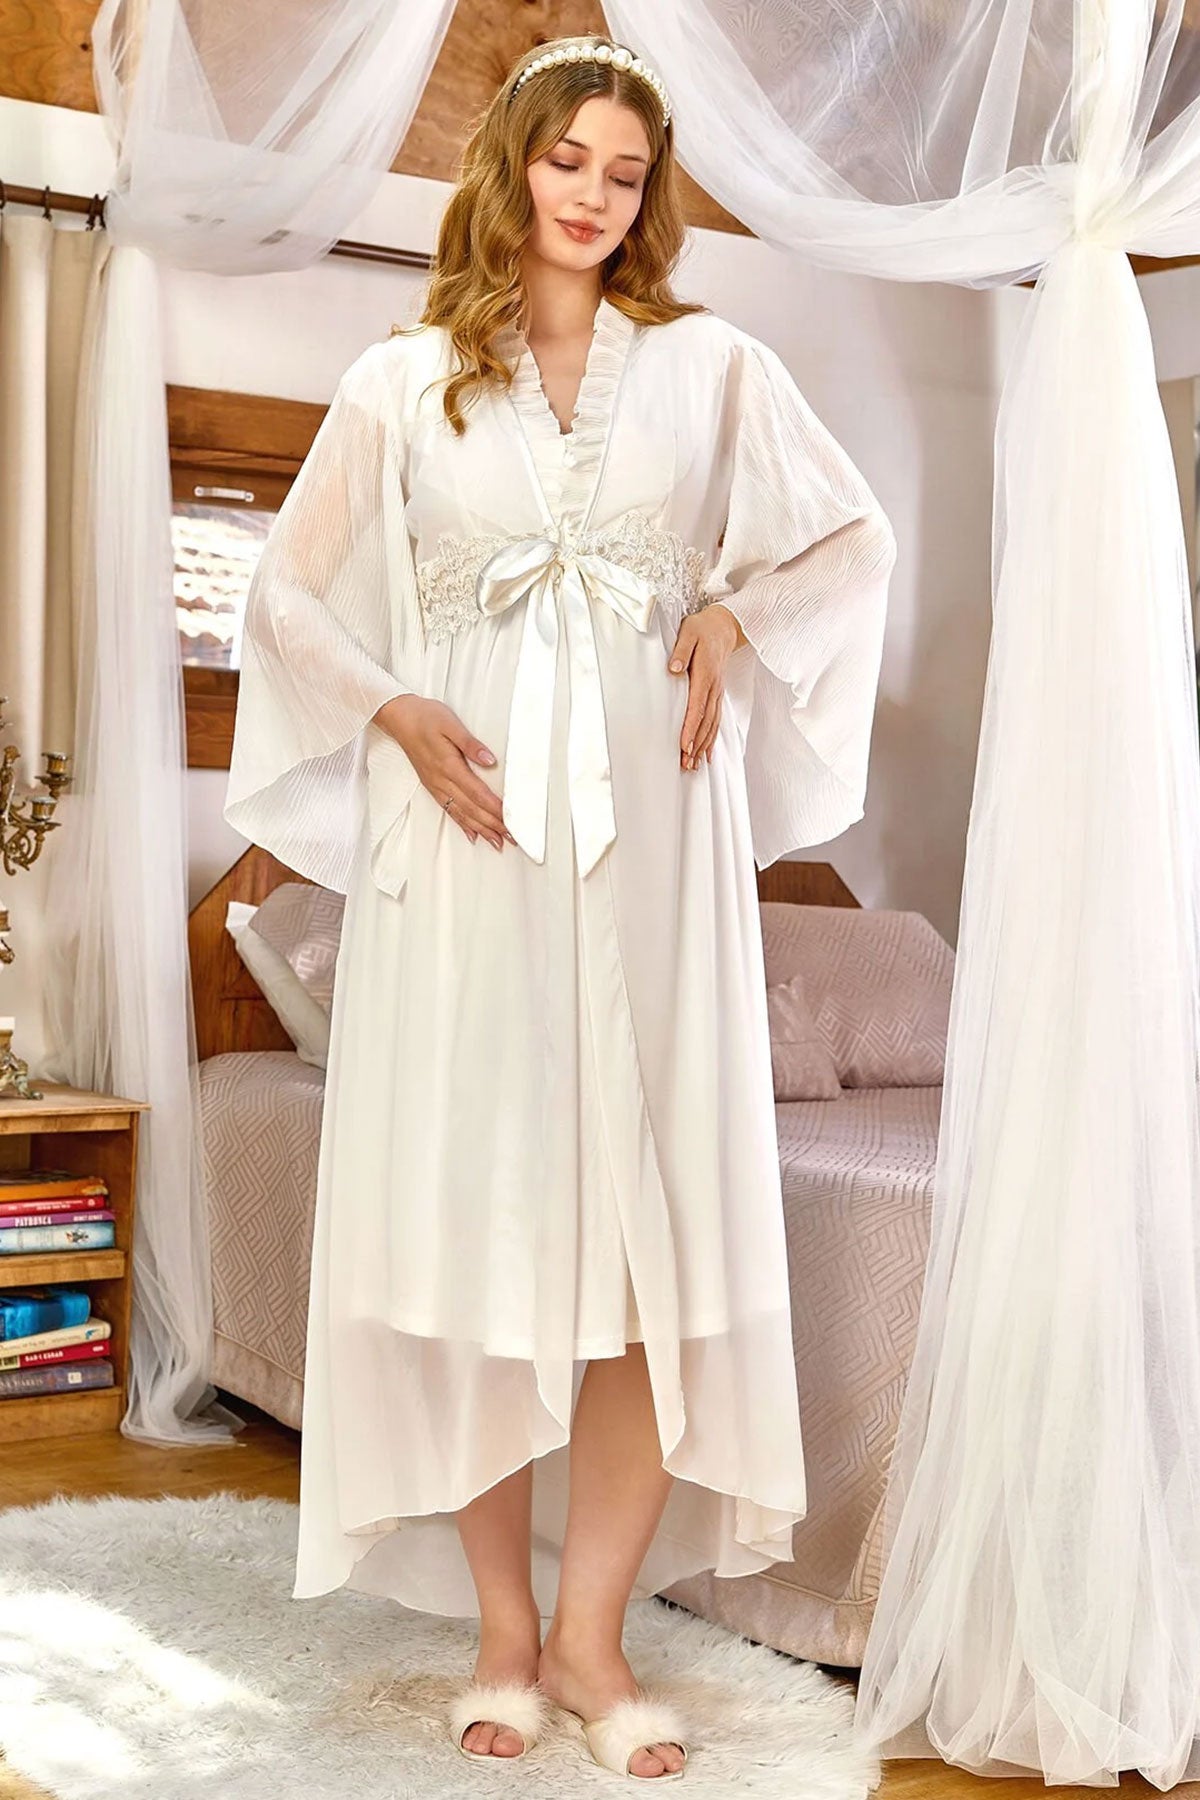 Maternity & Nursing Nightgowns With Robes